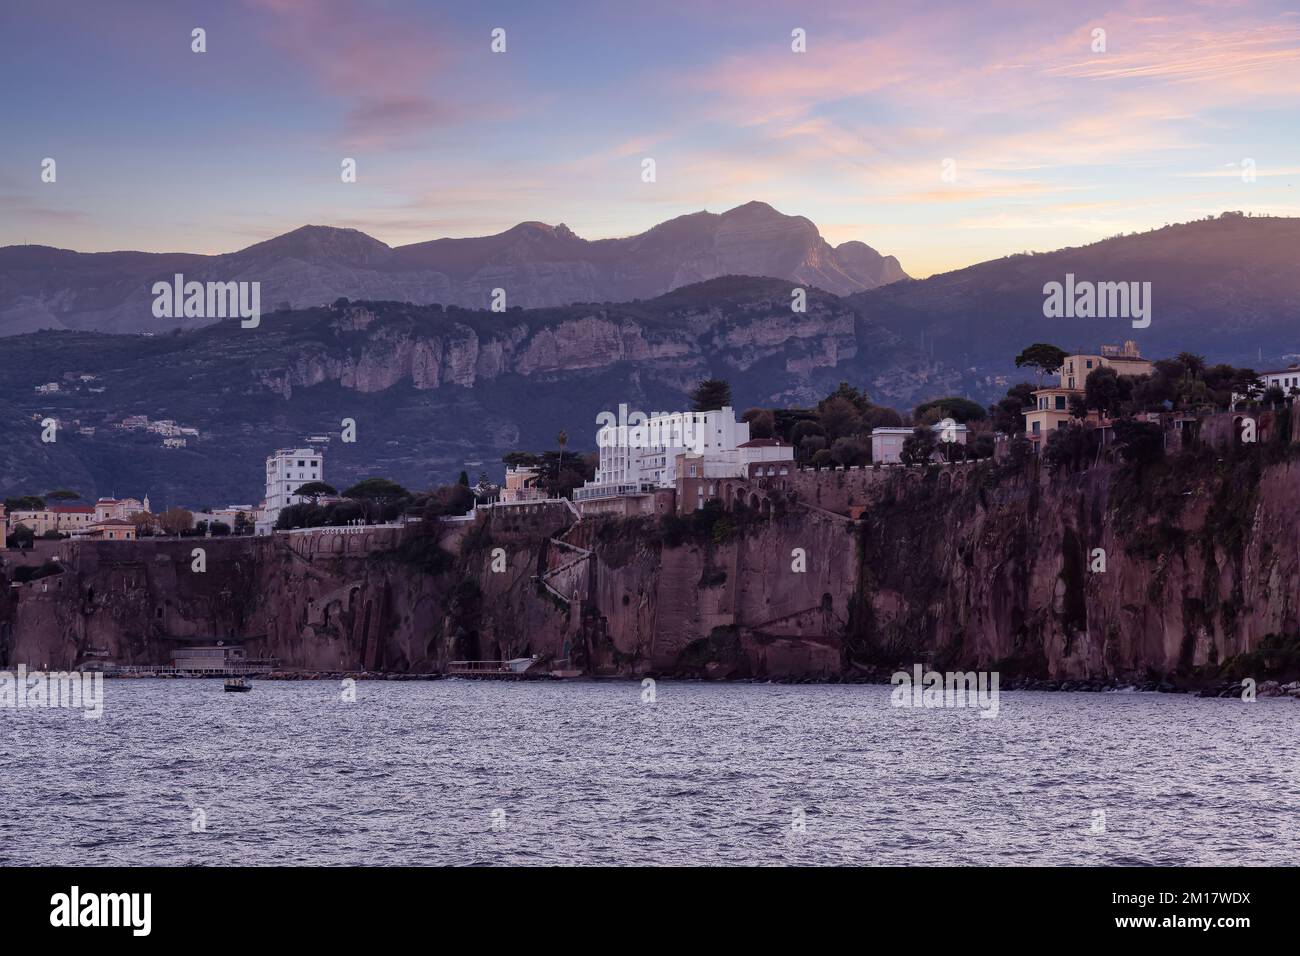 Homes and Hotels in a touristic town on the seafront. Sorrento, Compania, Italy Stock Photo